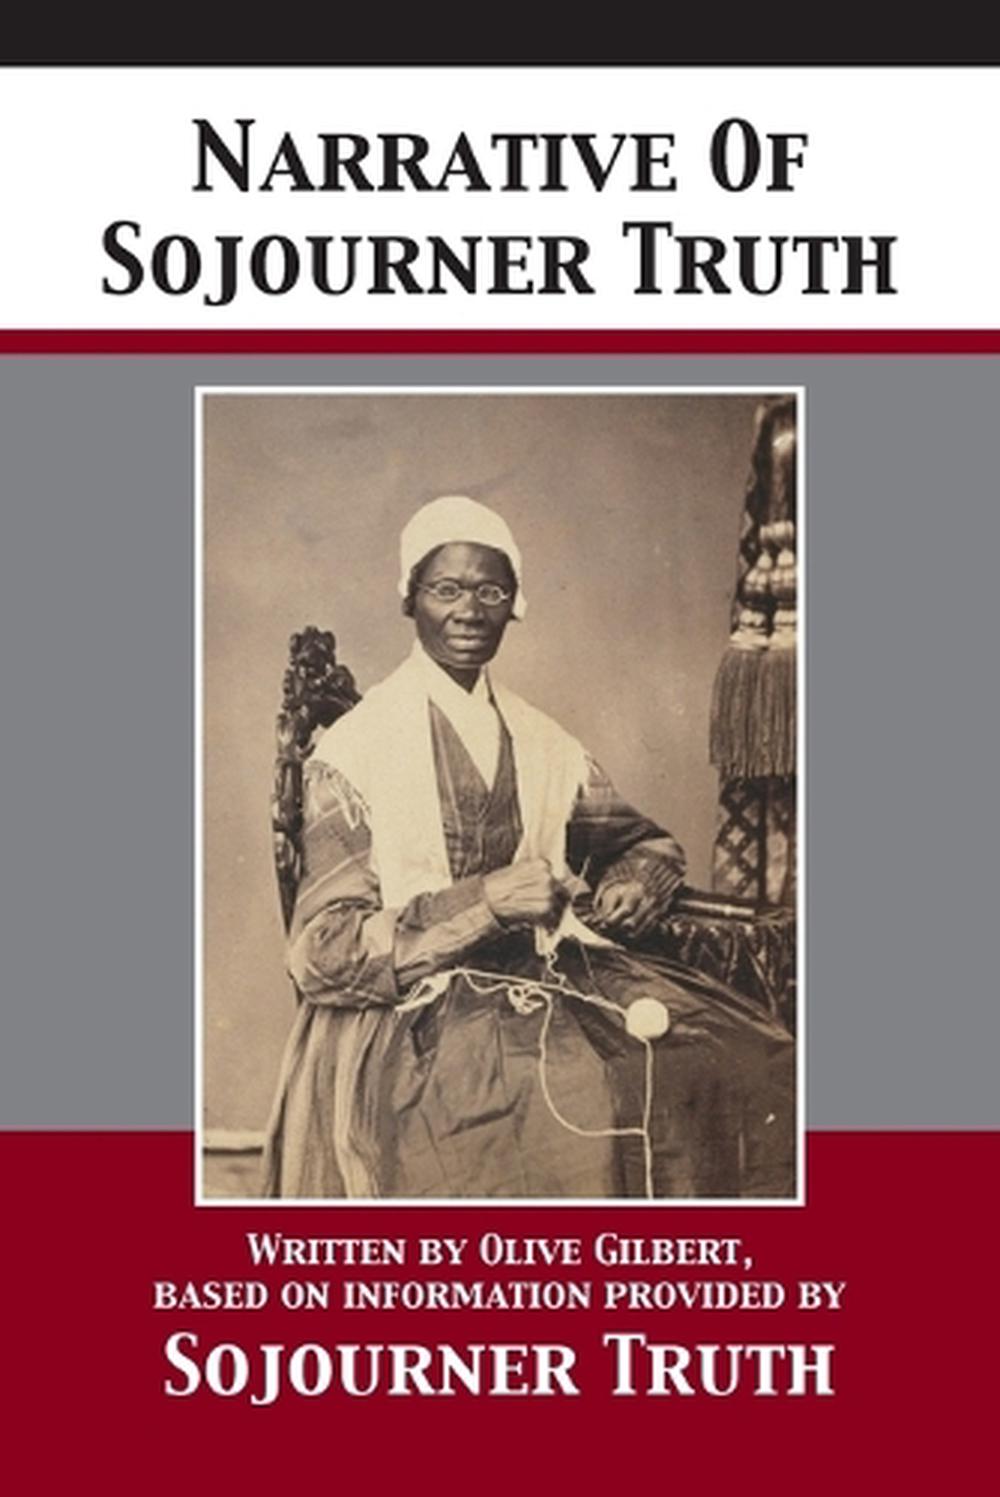 the narrative of sojourner truth